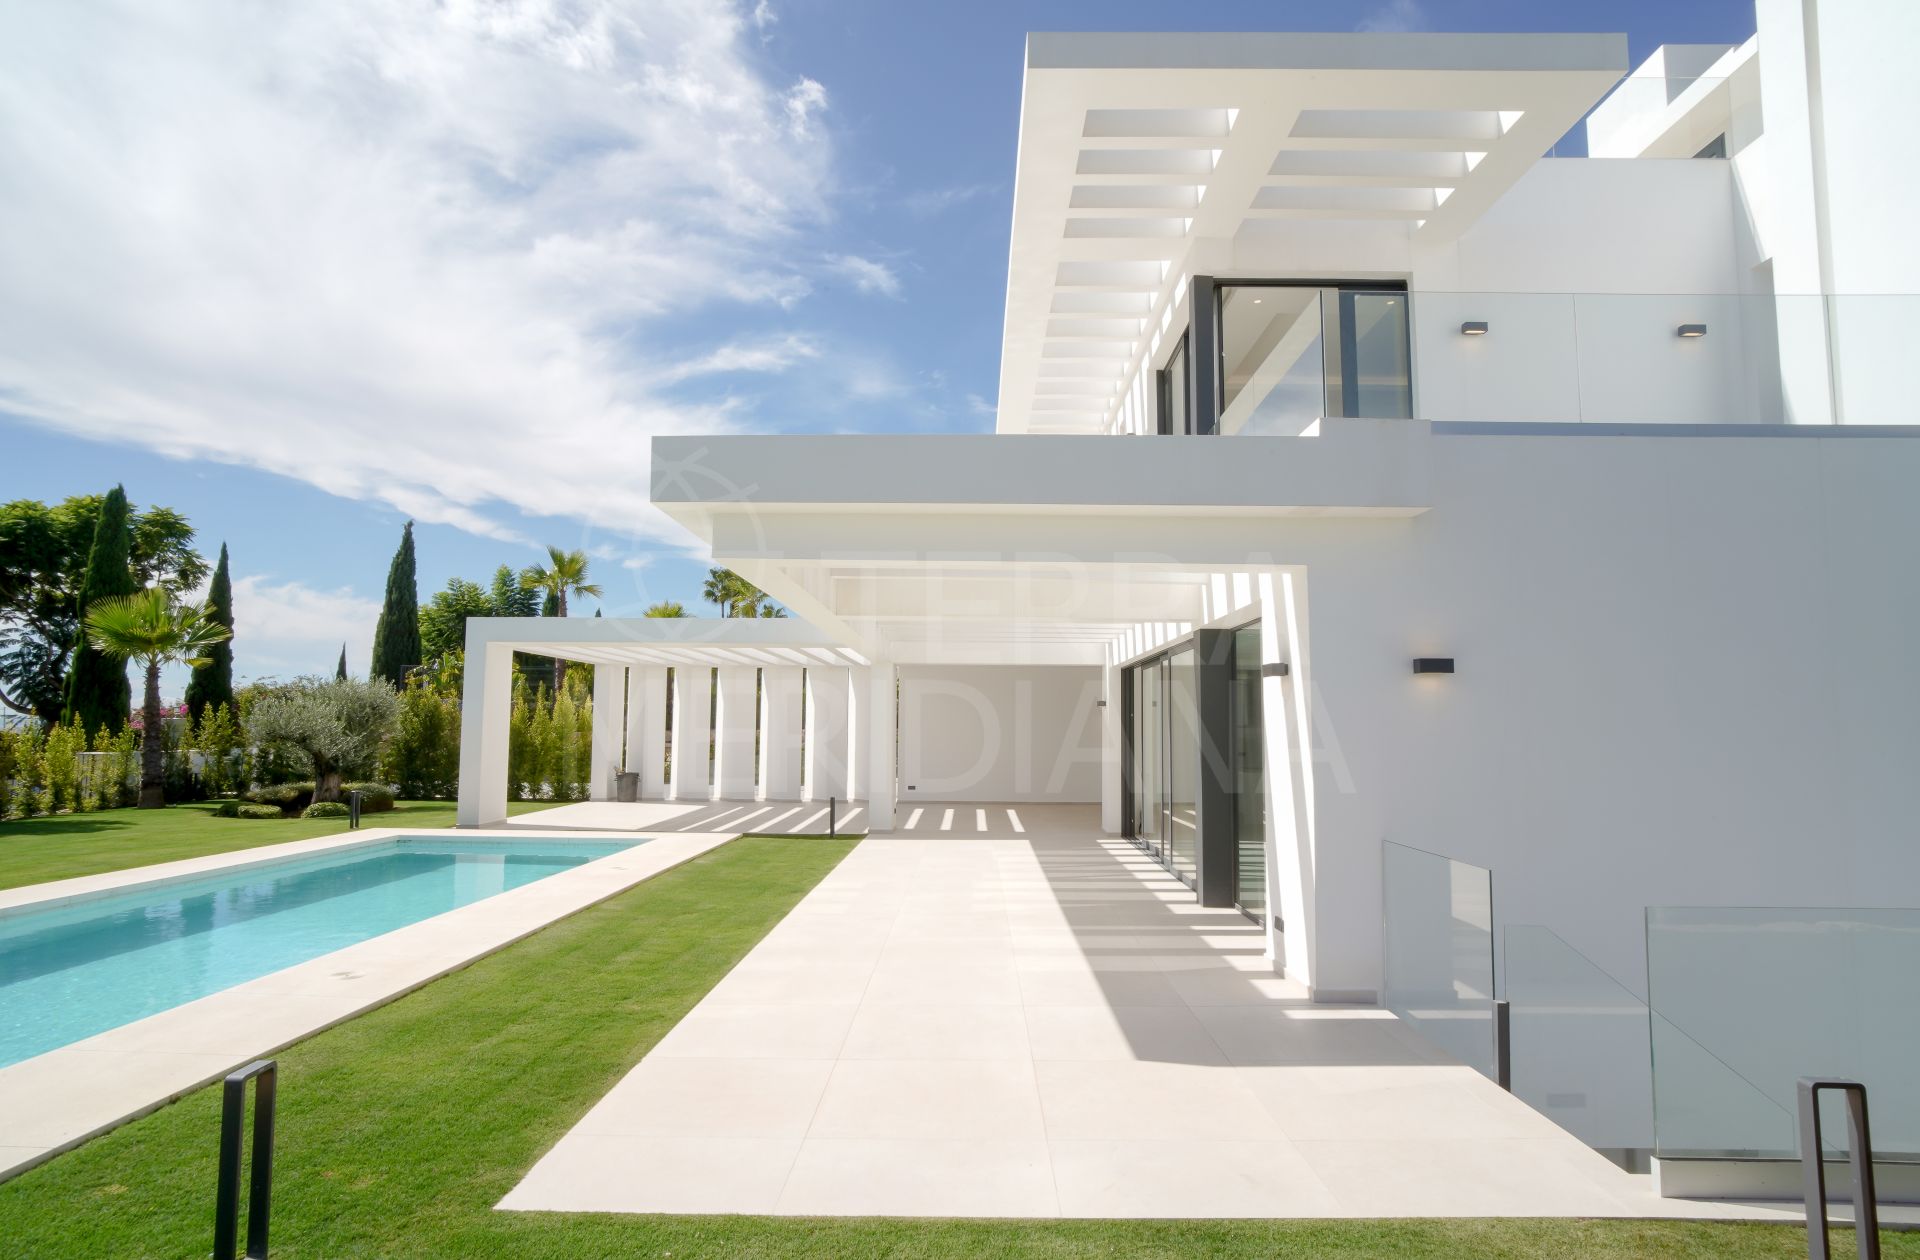 Recently completed luxury modern villa with spa for sale in Los Flamingos Golf, Benahavis